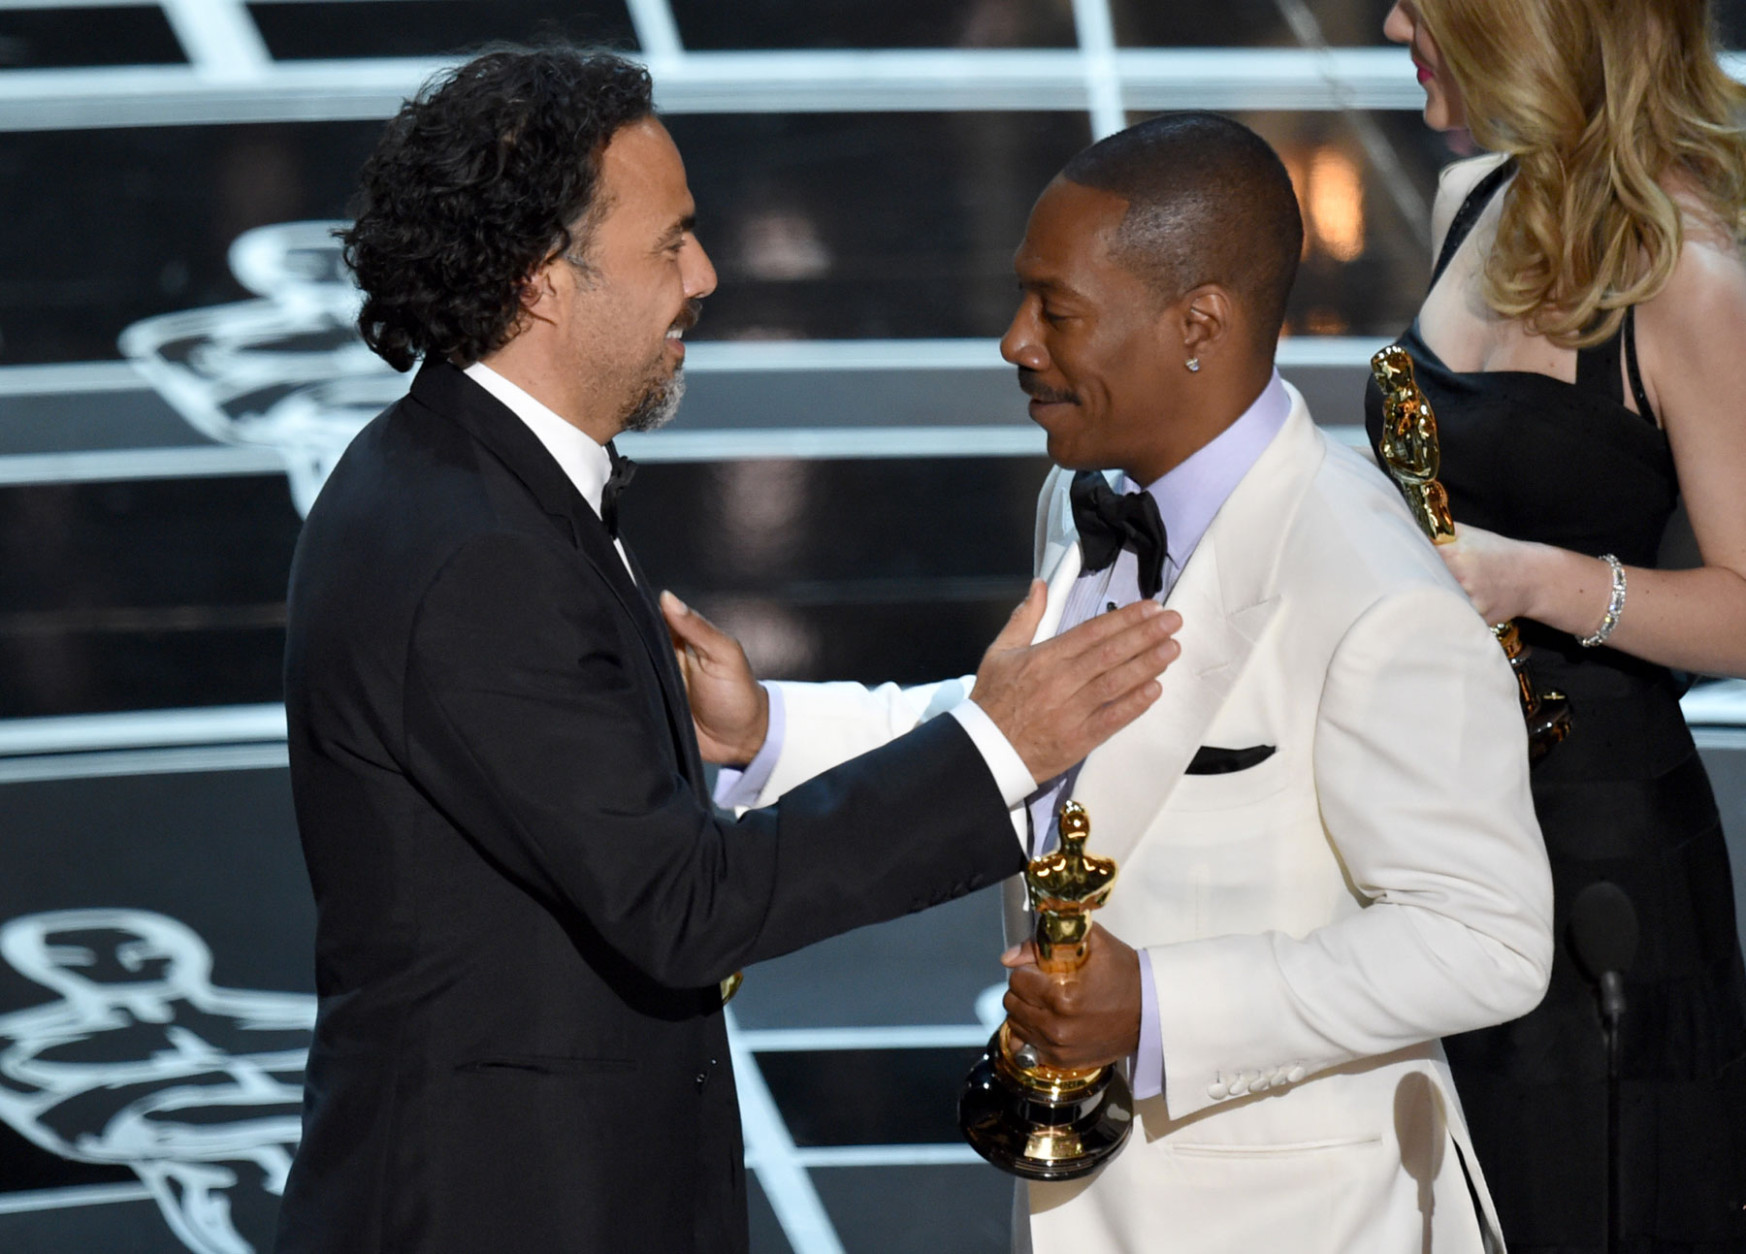 Eddie Murphy, right, presents Alejandro G. Inarritu with the award for the best original screenplay for “Birdman or (The Unexpected Virtue of Ignorance)” at the Oscars on Sunday, Feb. 22, 2015, at the Dolby Theatre in Los Angeles. (Photo by John Shearer/Invision/AP)